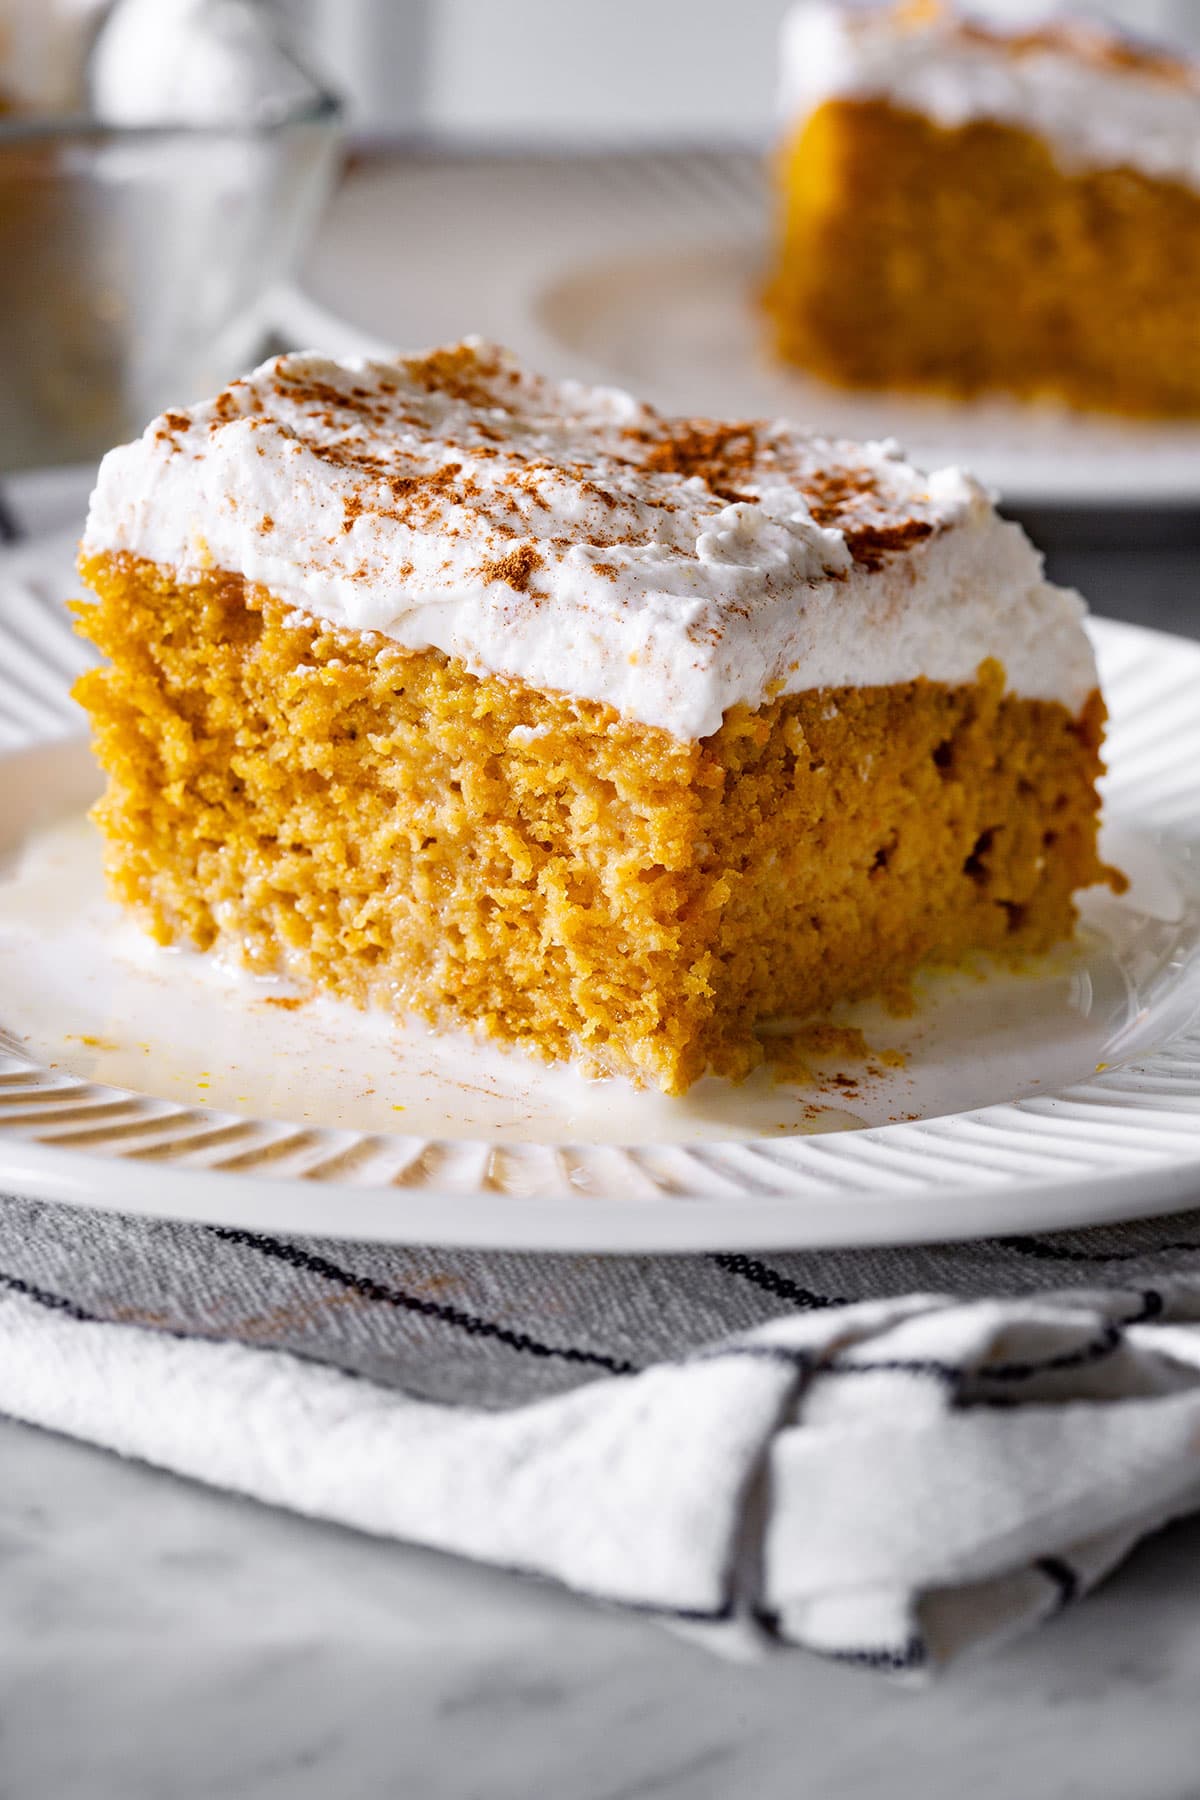 Pumpkin spice tres leches cake portion on a plate.